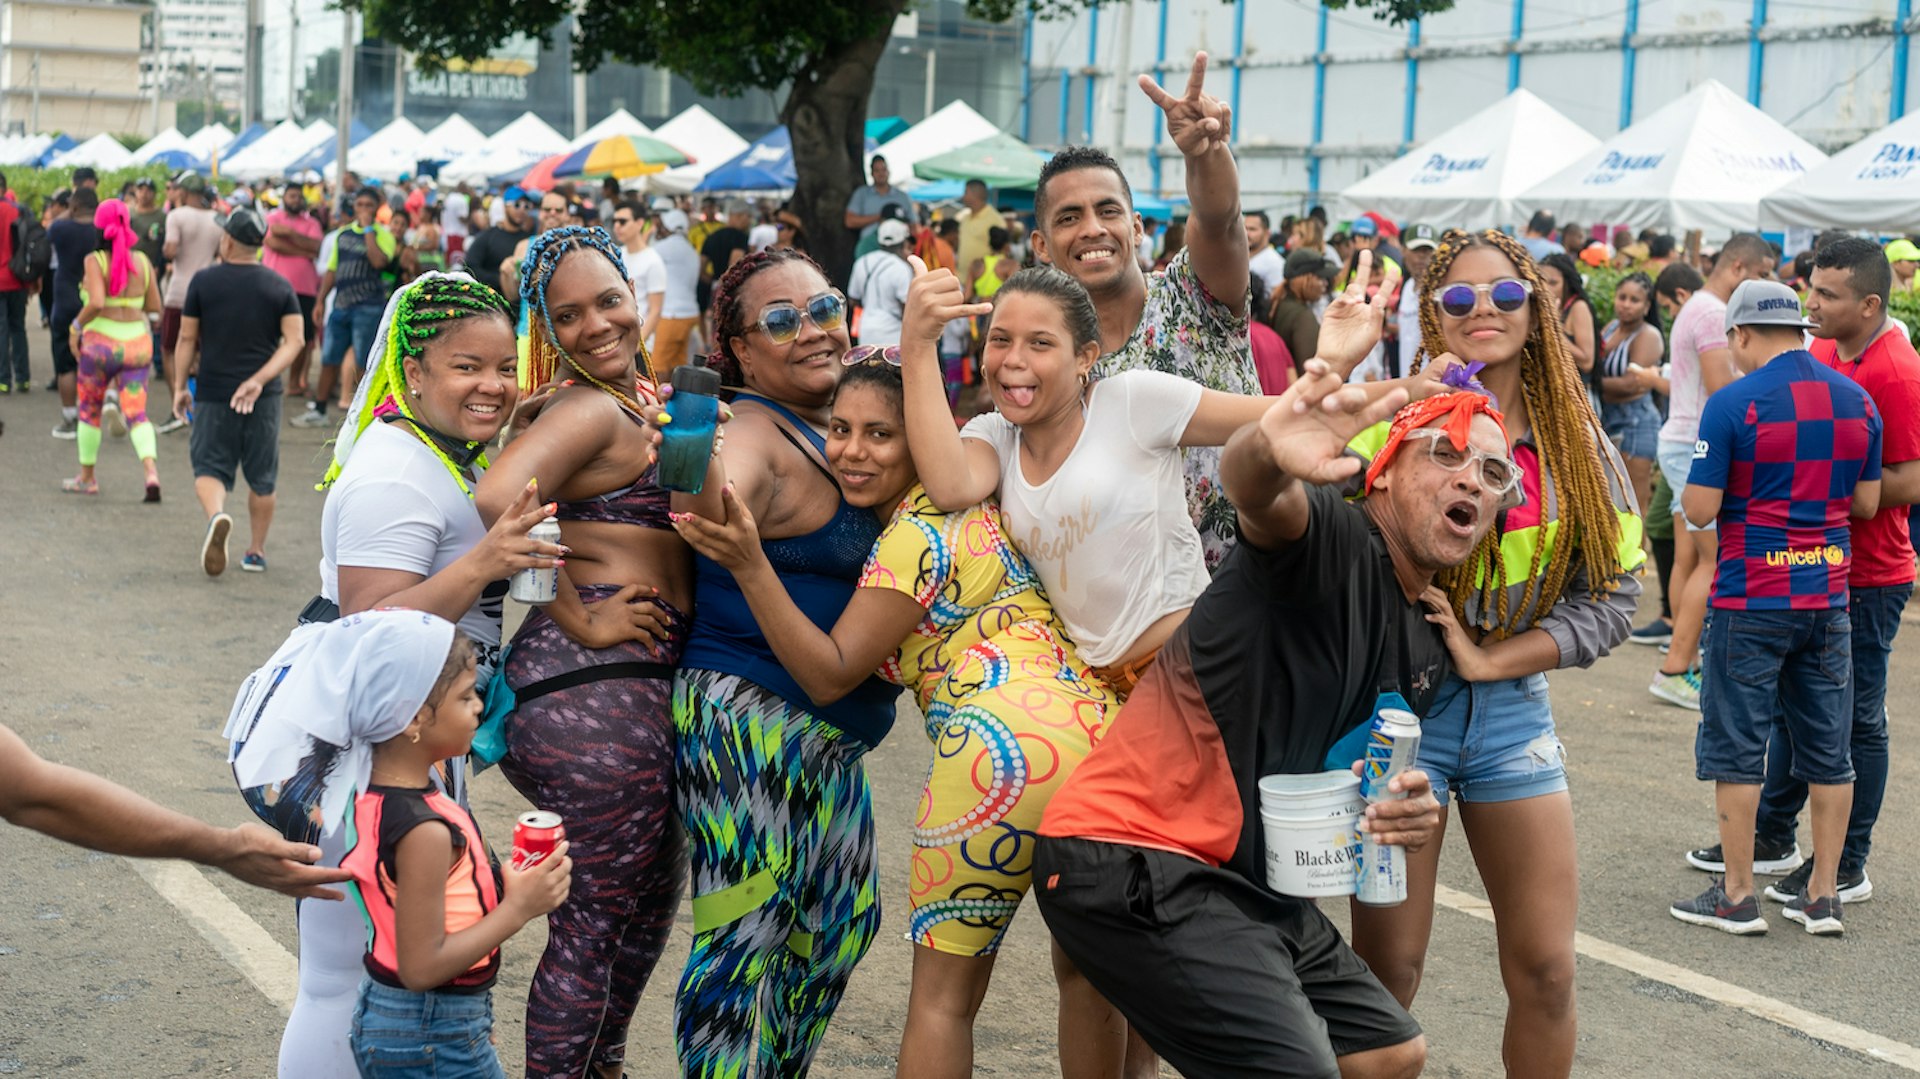 Young Panamanians strike a goofy pose during Carnaval (Carnival) celebrations in Panama City, Panama, Central America